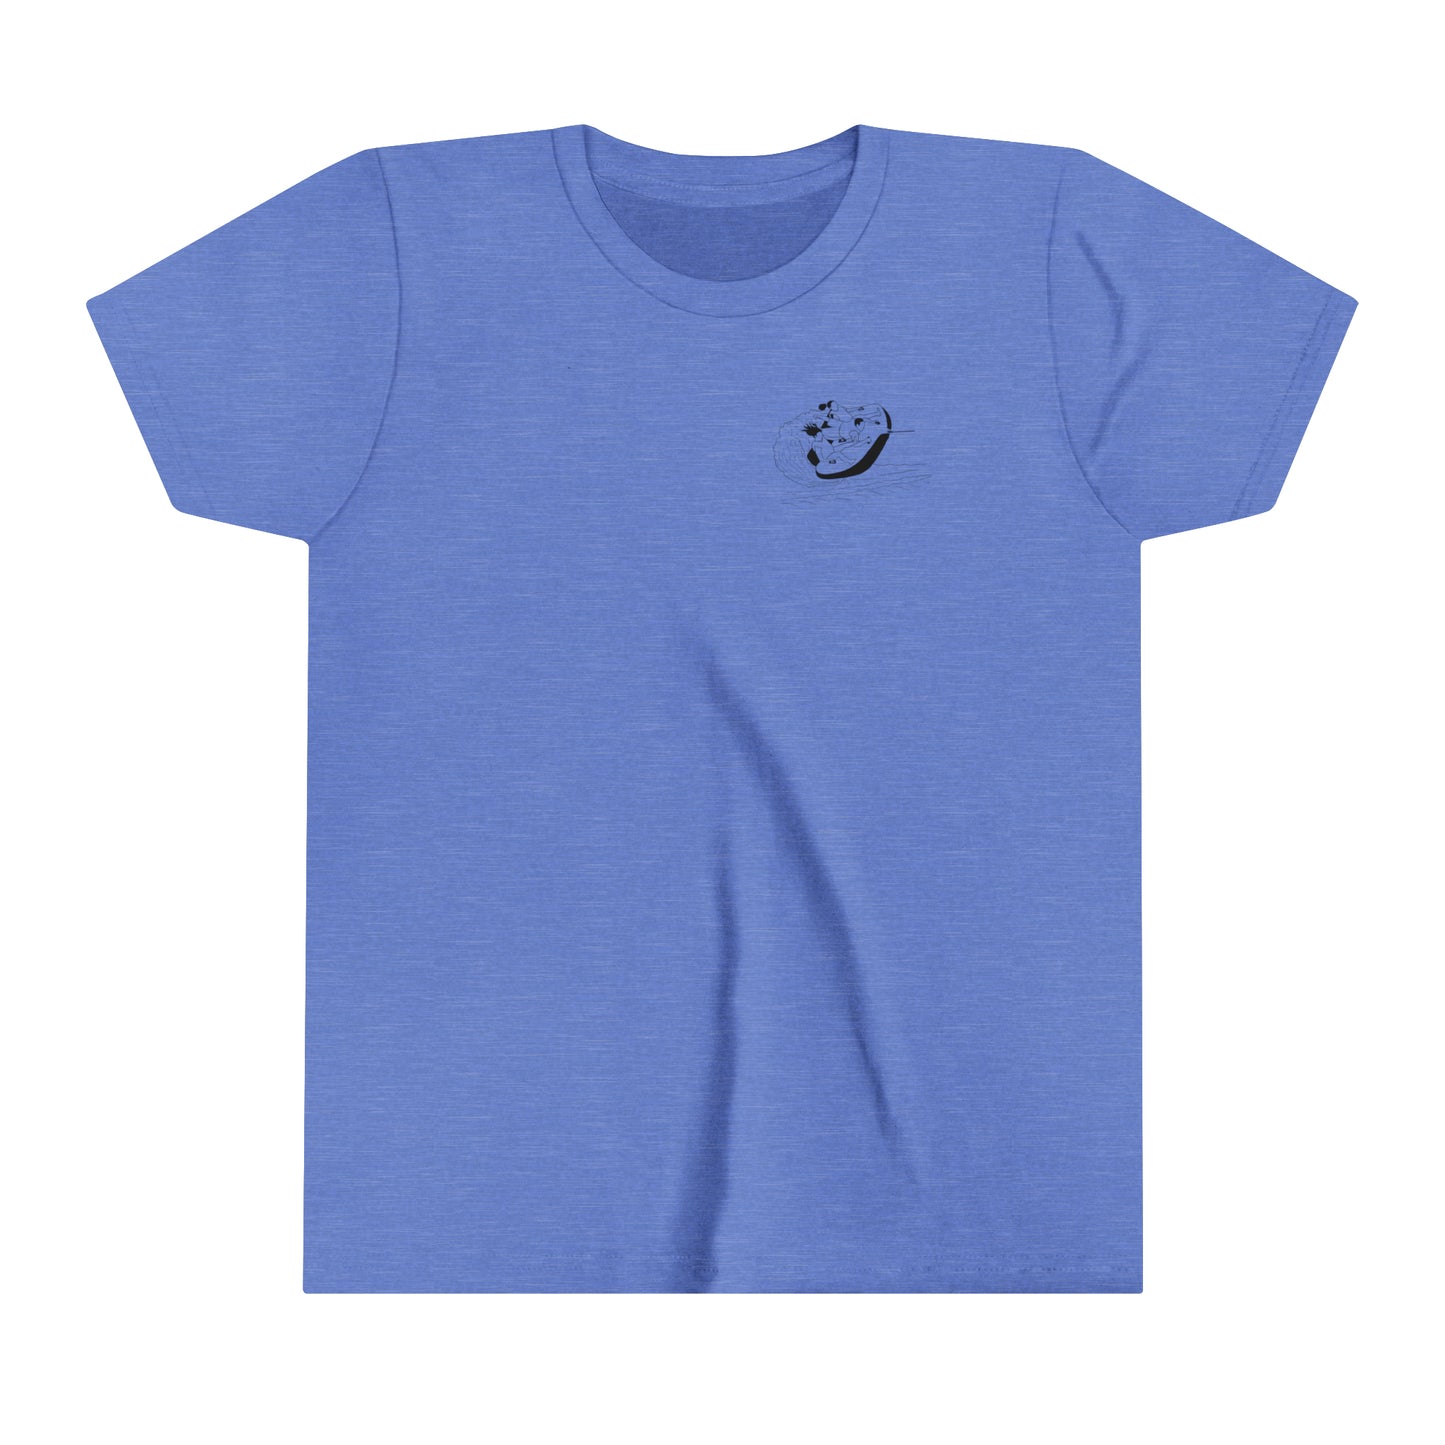 Tubing Front Patch Youth Short Sleeve Tee